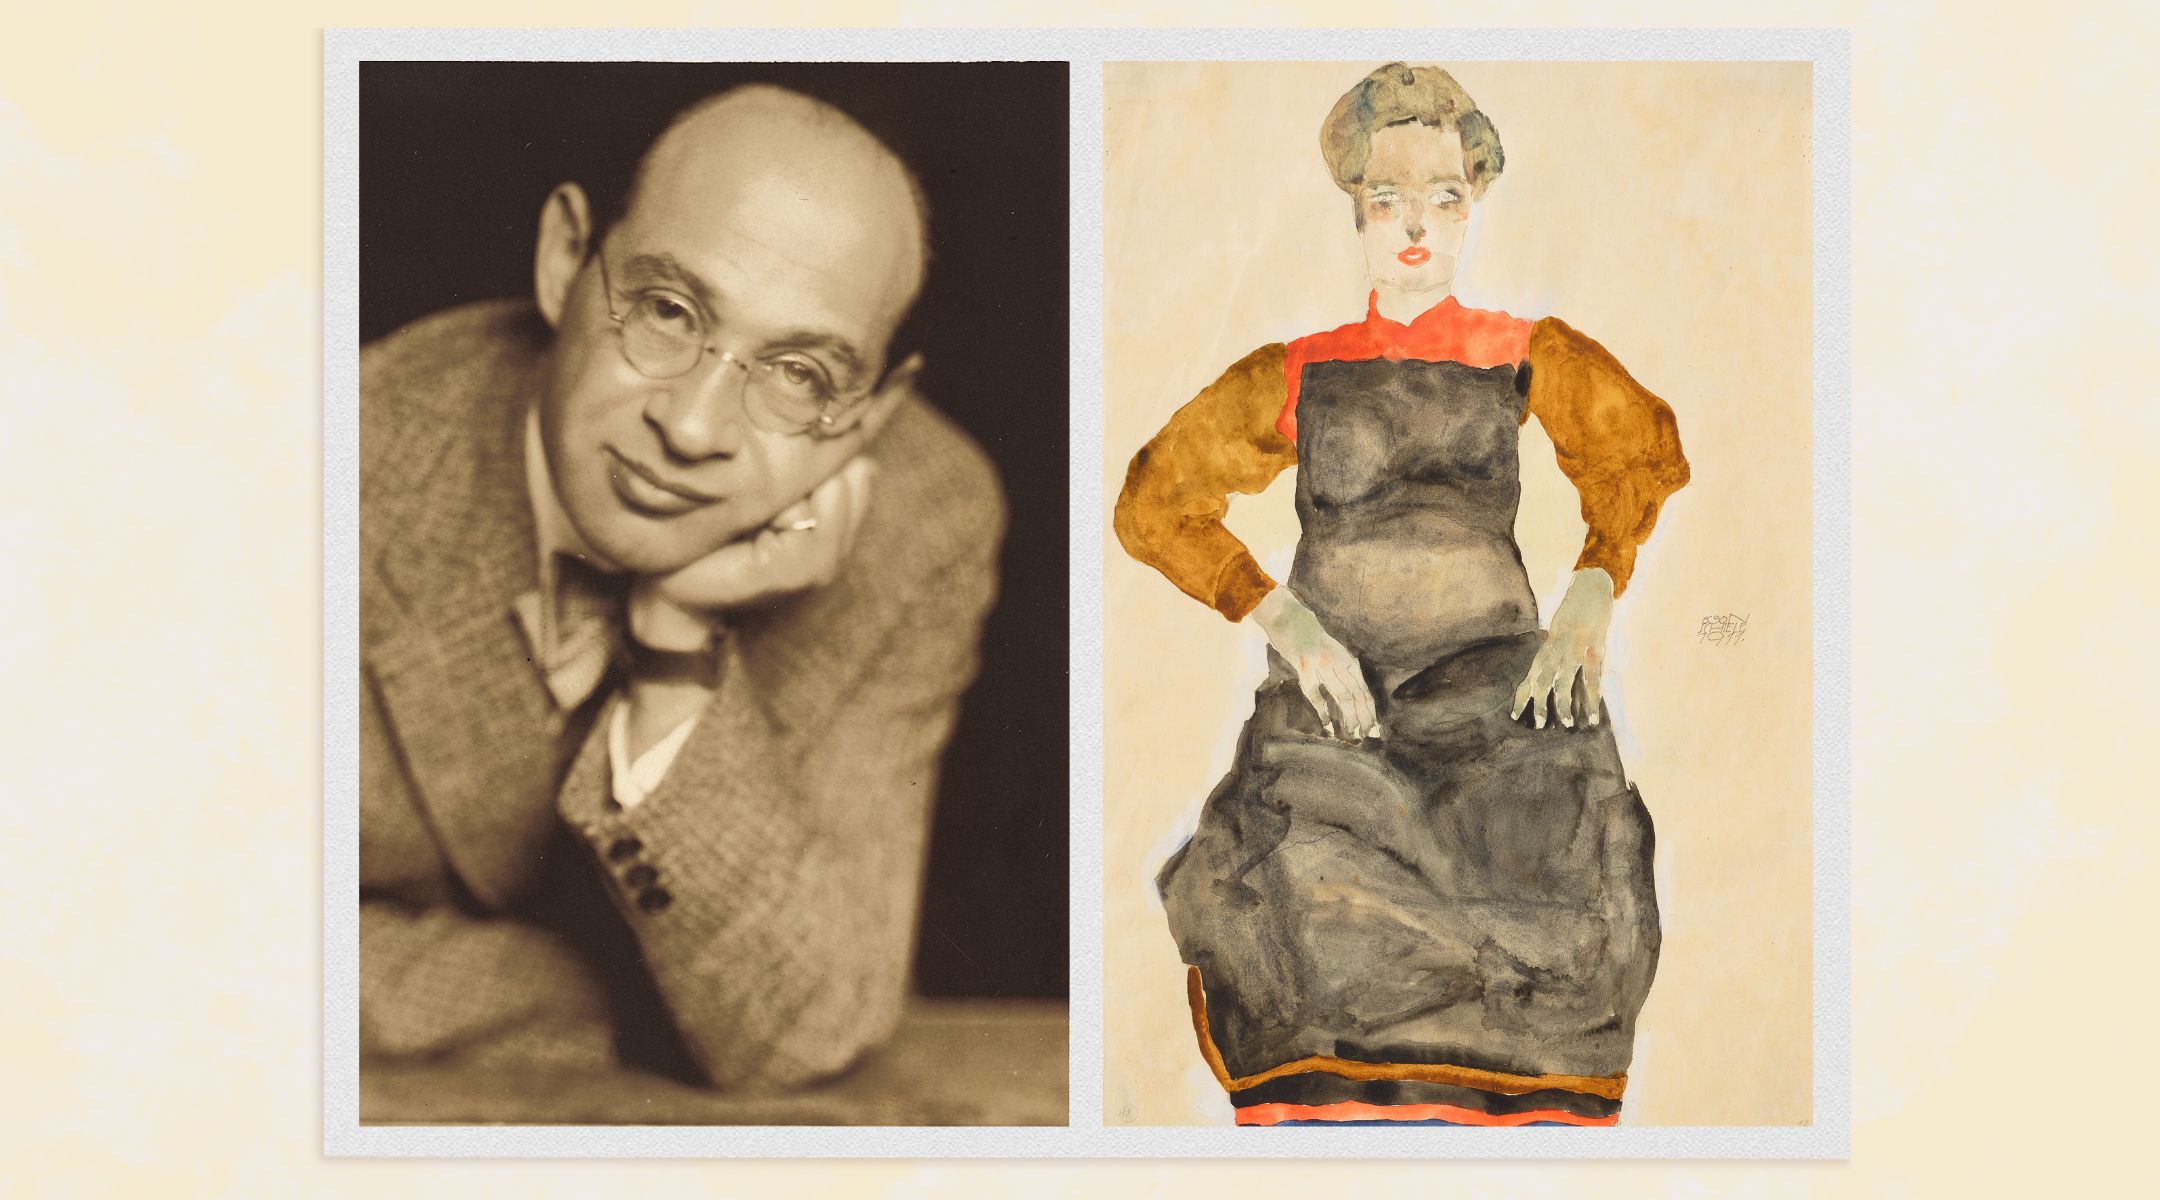 Fritz Grünbaum was an Austrian Jewish cabaret performer and art collector. (Courtesy of CHRISTIE’S IMAGES LTD. 2022 and Getty Images)